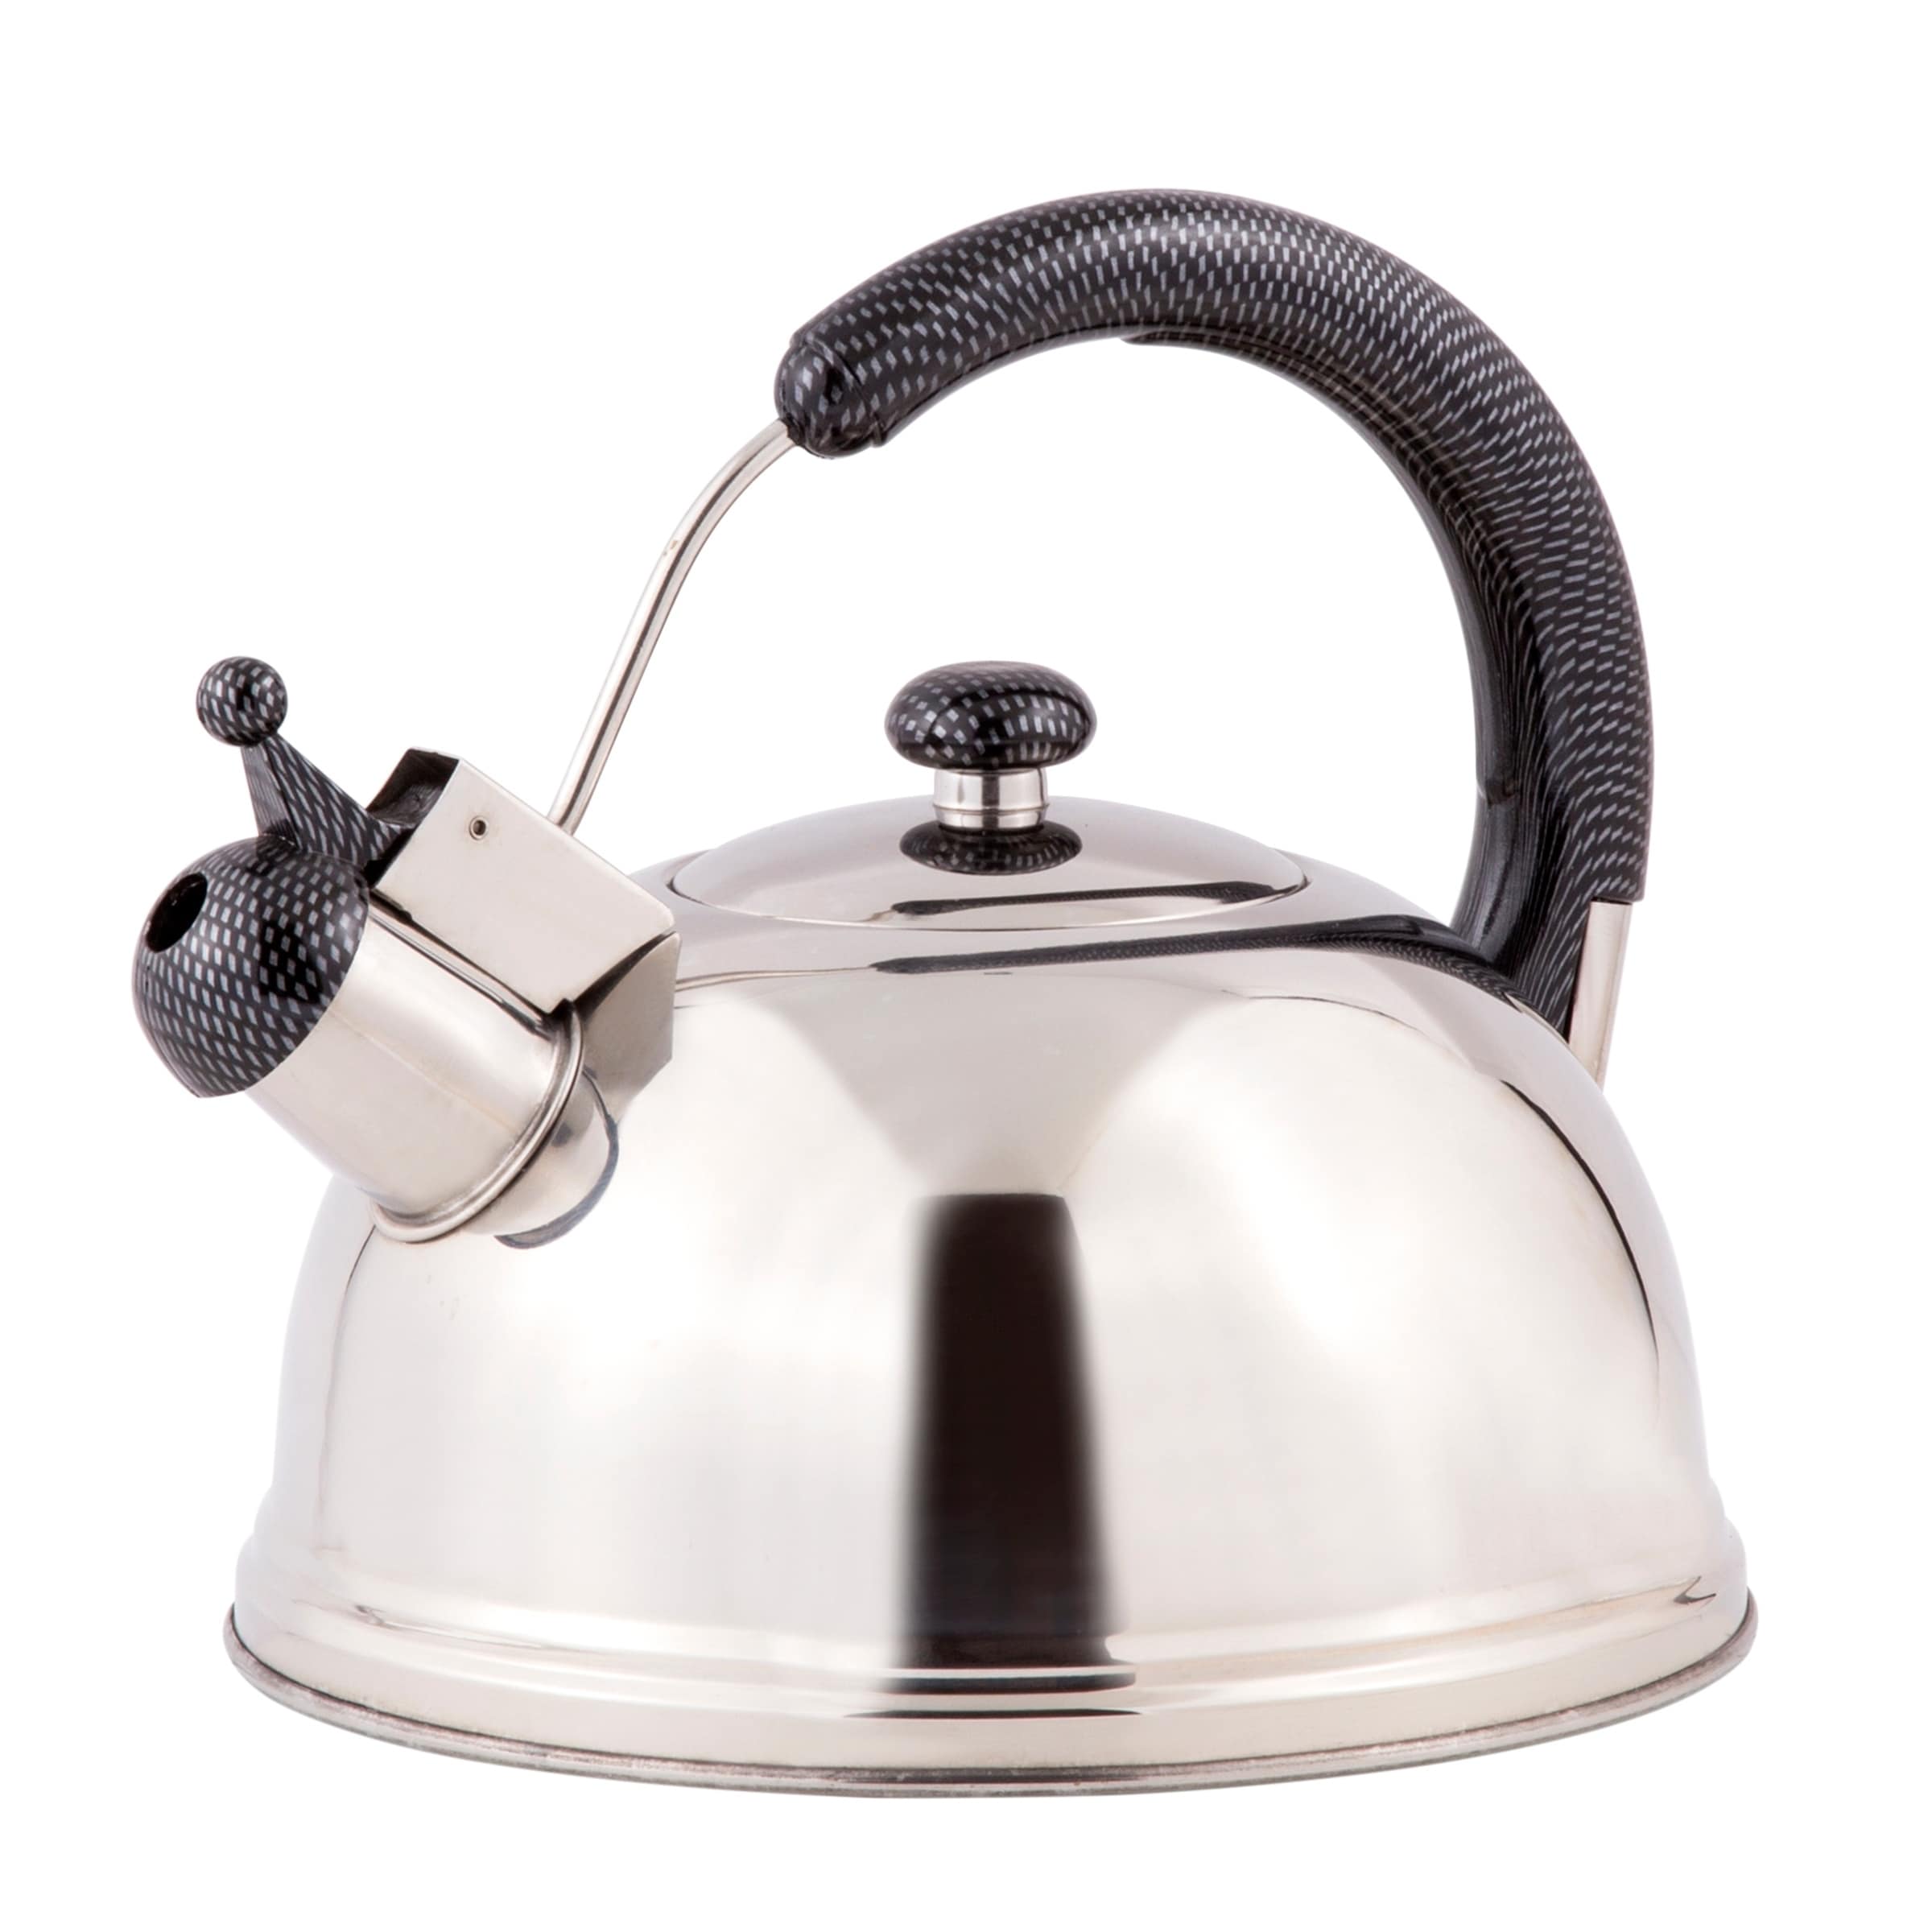 Stainless Steel Stovetop Whistling Tea Kettle Classic Teapot with Ergonomic Handle, Works on Induction Cooktops 4 Liters 2406, Silver